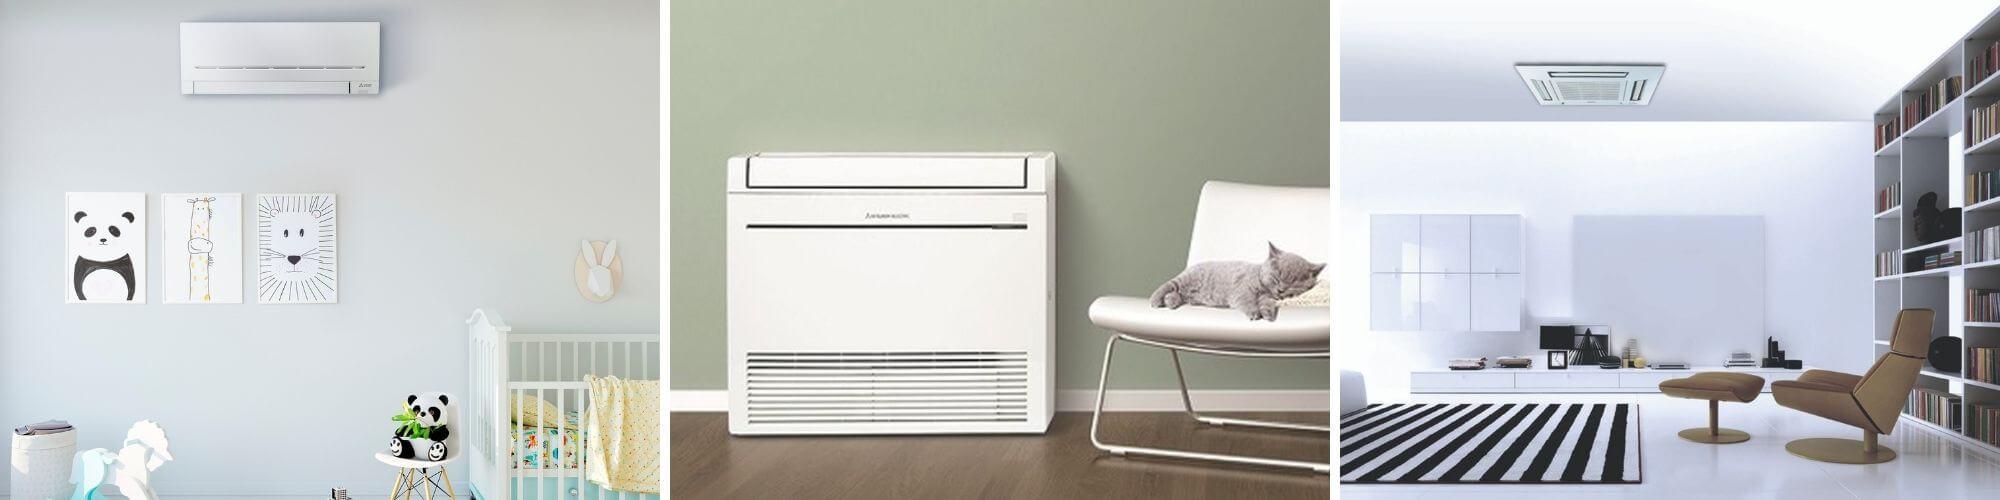 Types-of-Heat-Pump-Air-Conditioners.jpg#asset:16010